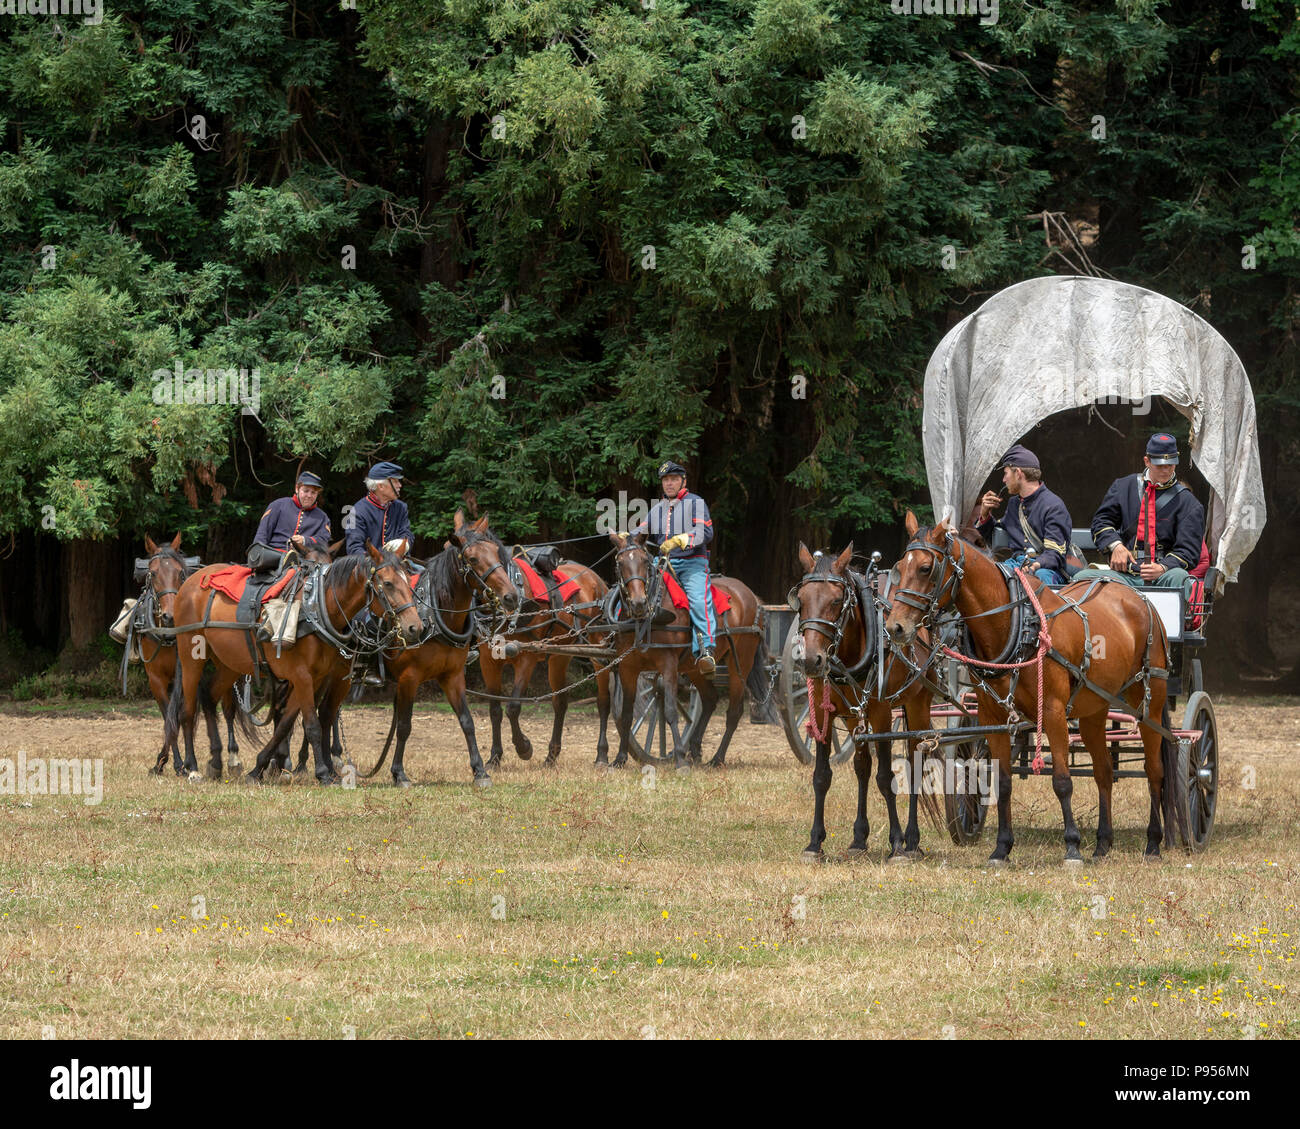 Duncans Mills, California, USA. 14 July 2018.  Union army at reenactement of the US Civil War, Civil War days. This event in Northern CA is one of the largest on the West Coast and happens every year Credit: AlessandraRC/Alamy Live News Stock Photo